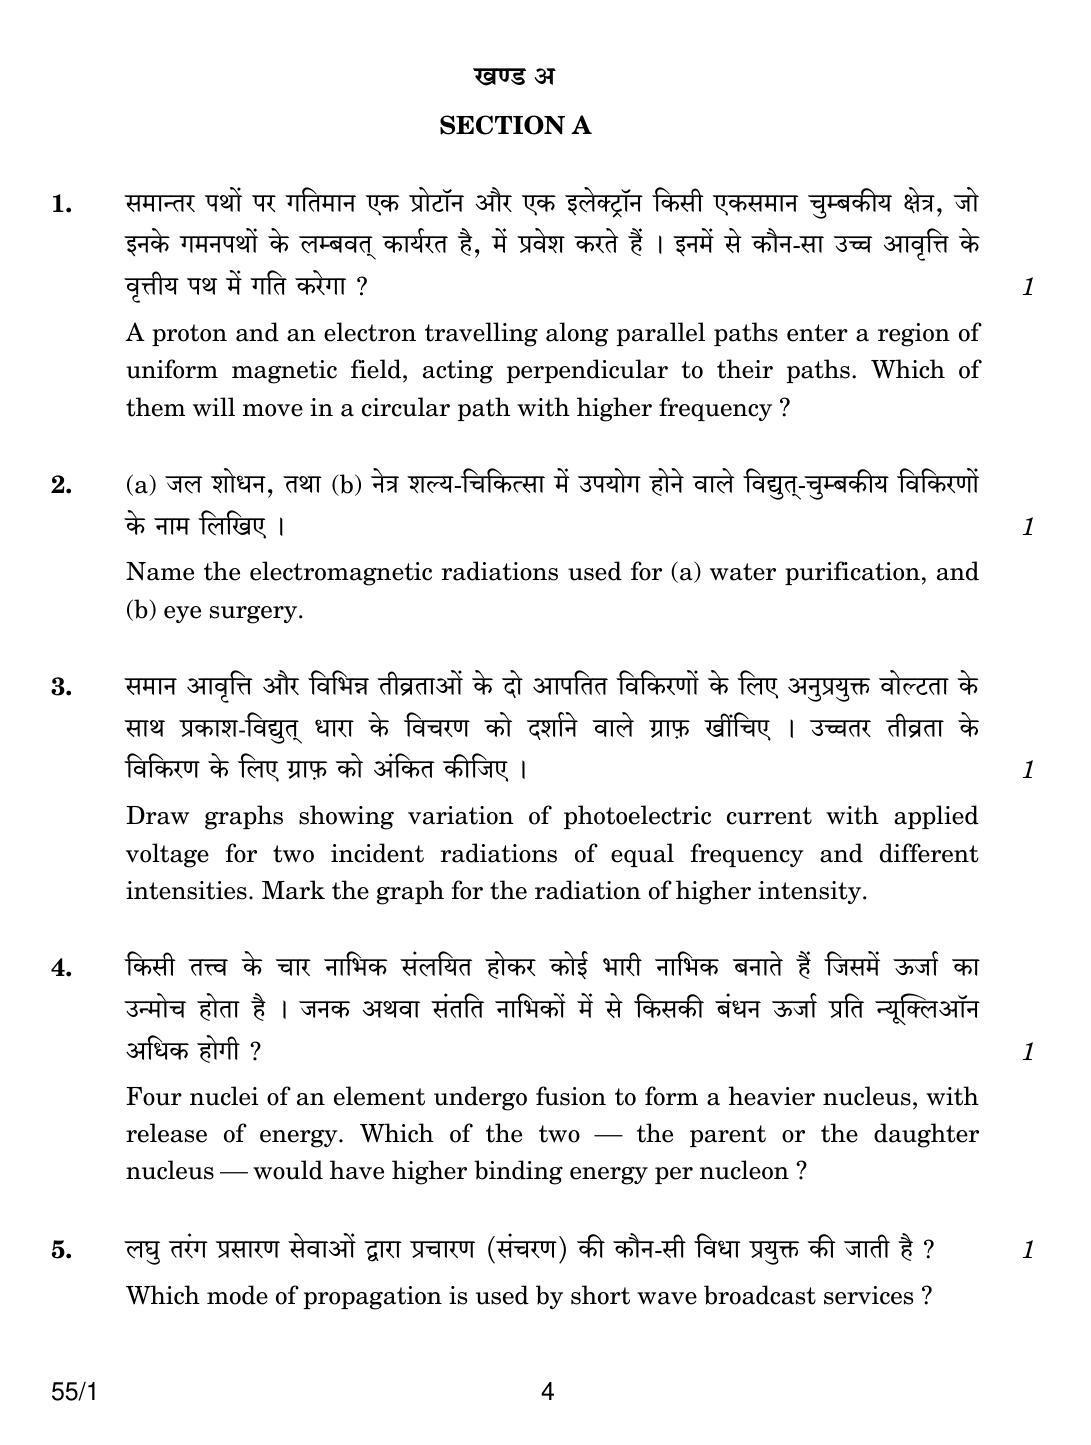 CBSE Class 12 55-1 PHYSICS 2018 Question Paper - Page 4